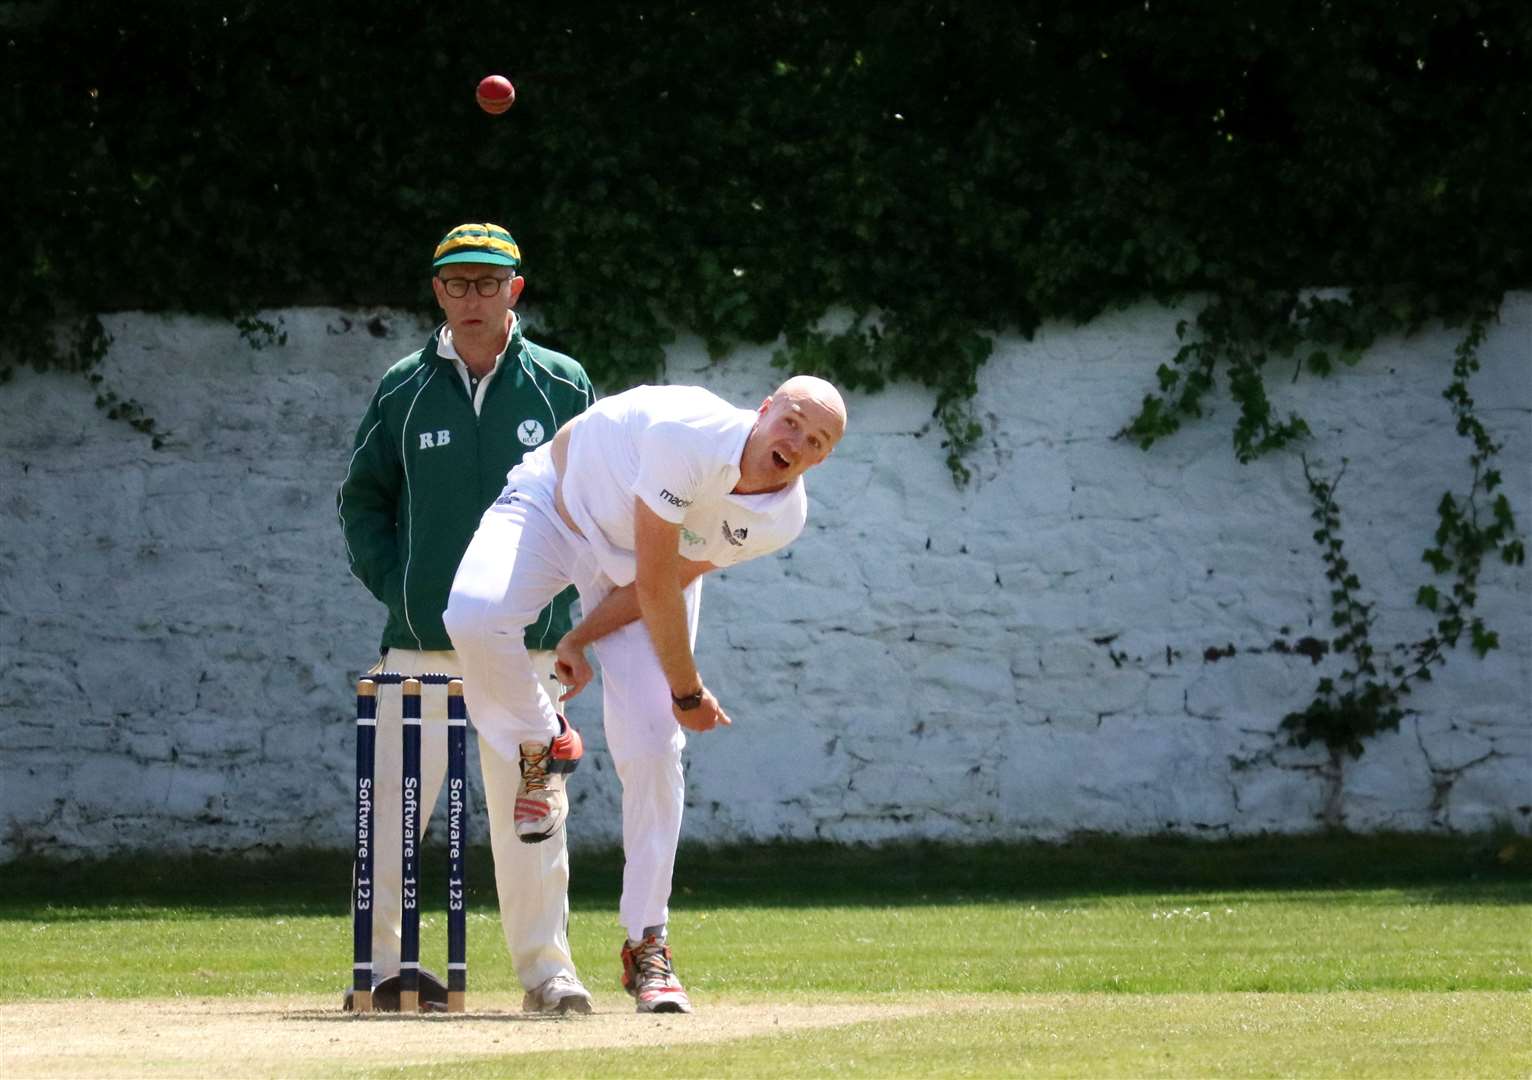 Shaun Thomas took three wickets as Northern Counties won at Nairn County. Picture: James Mackenzie